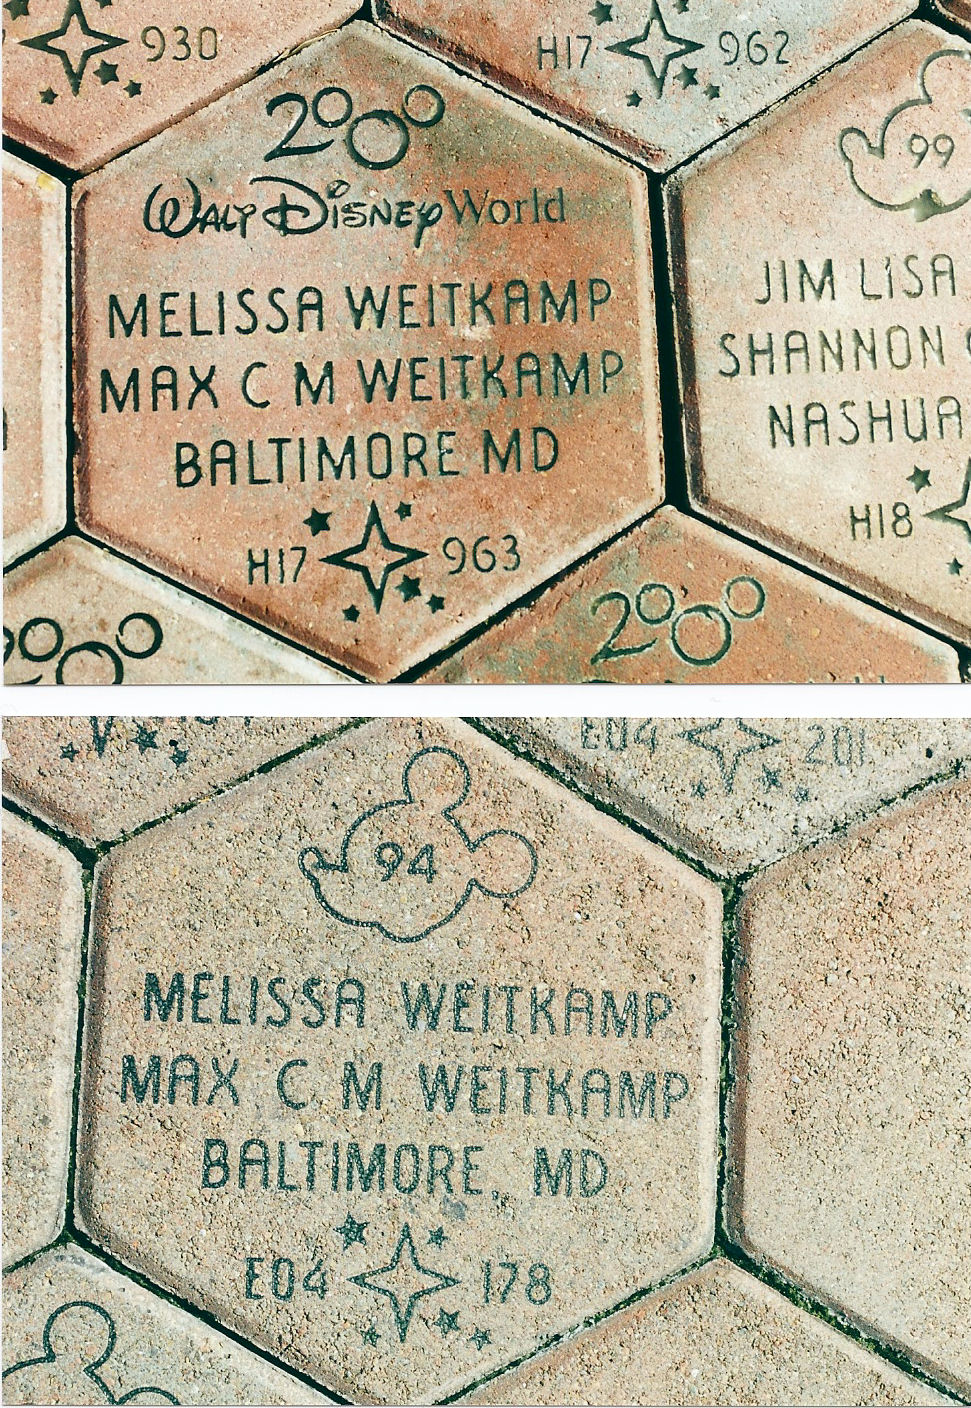 Both of my stones right outside of The Magic Kingdom at Walt Disney World.